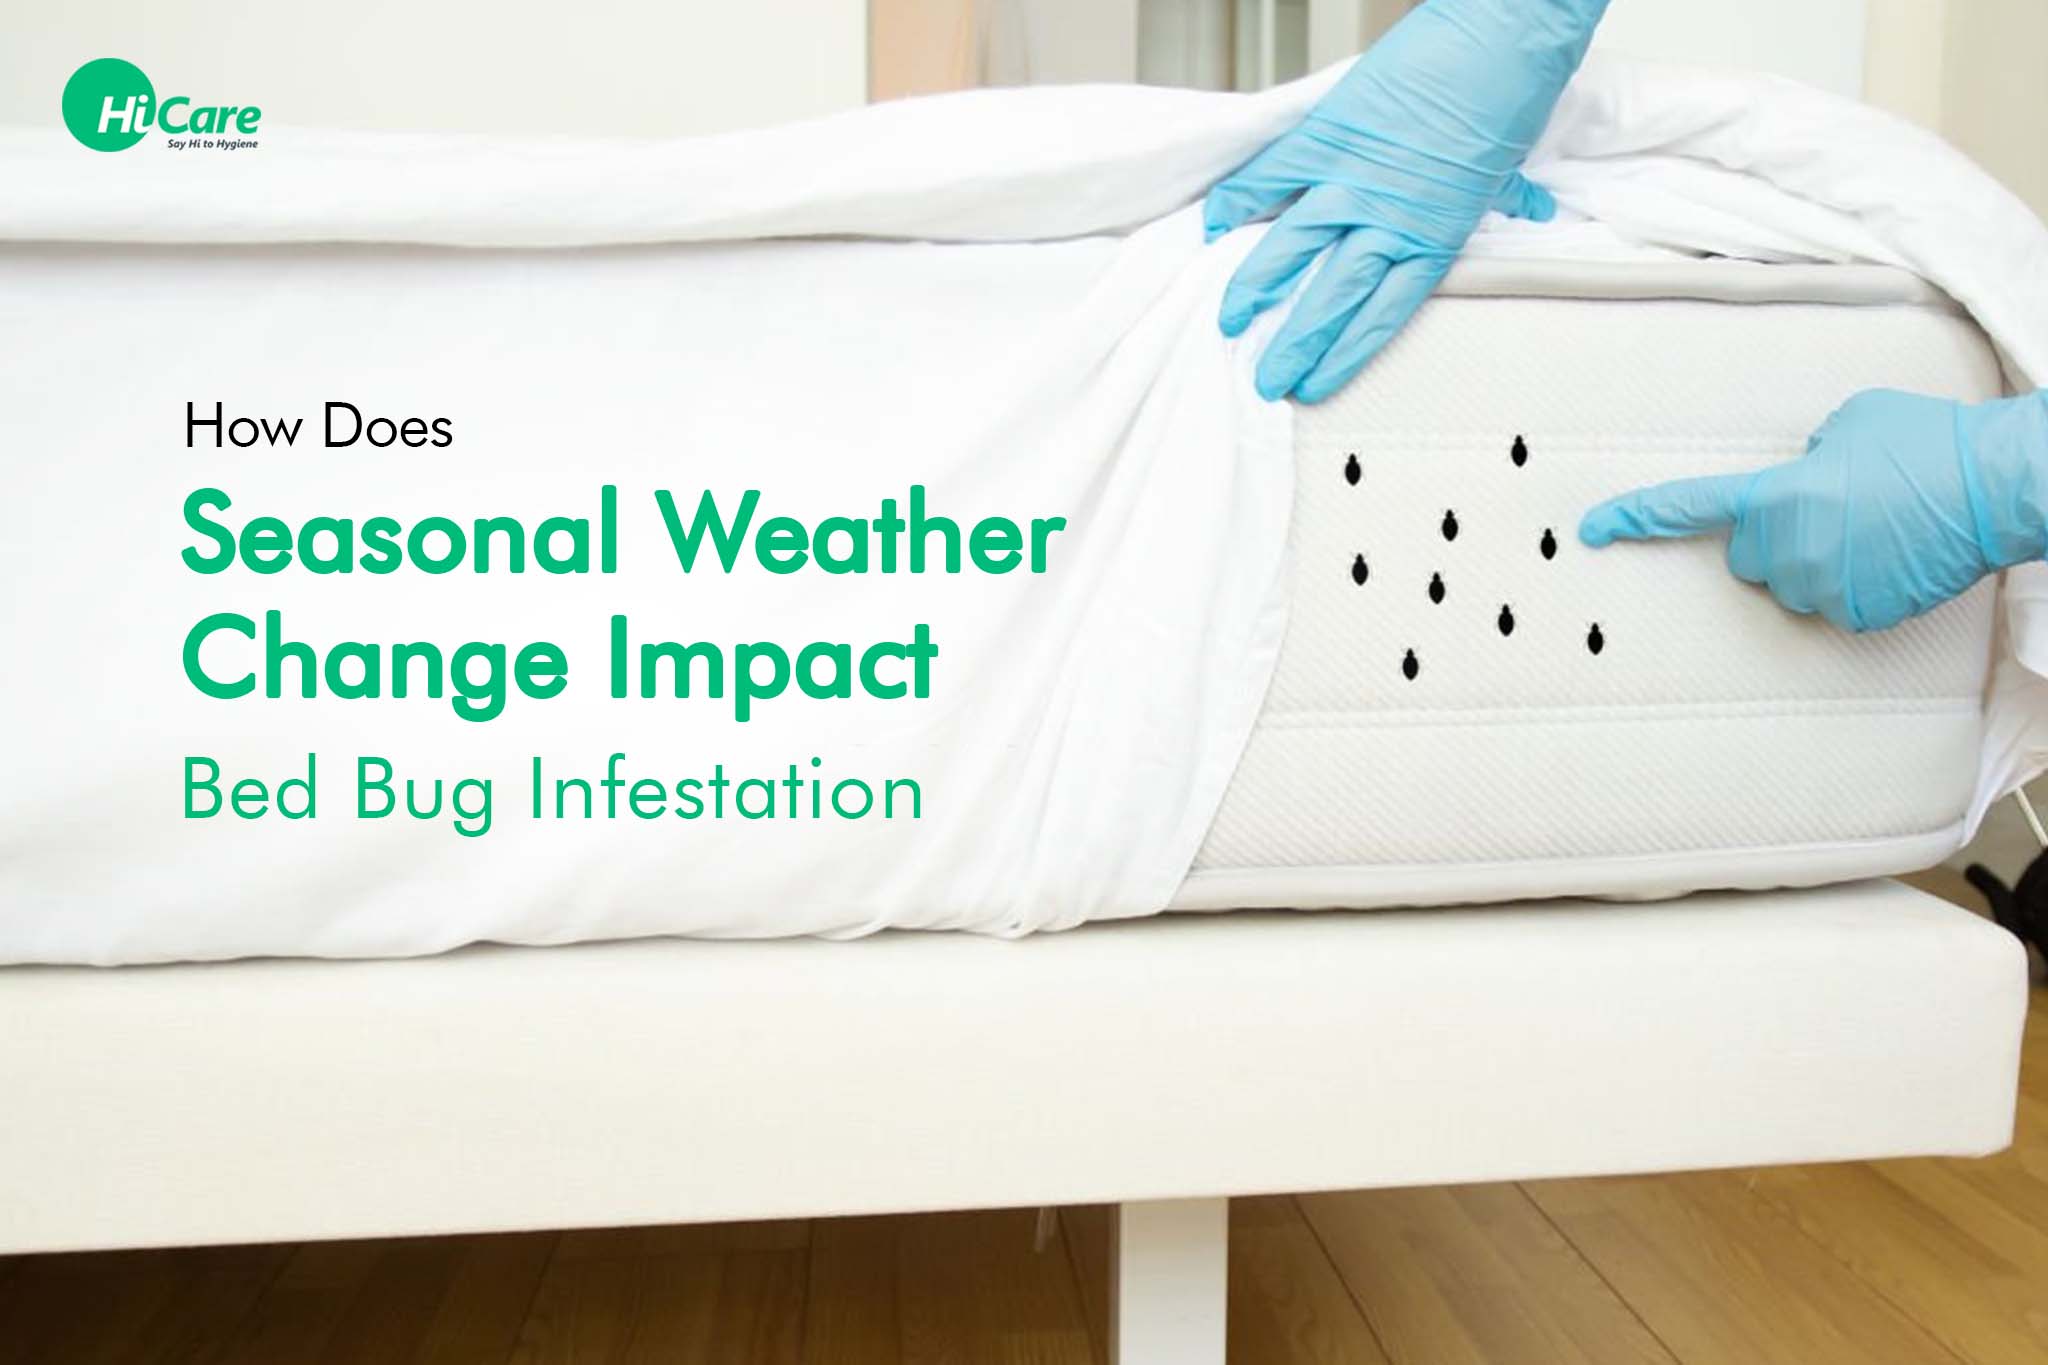 Bed Bug Infestation: Know How Weather Change Can Impact Pest Infestation